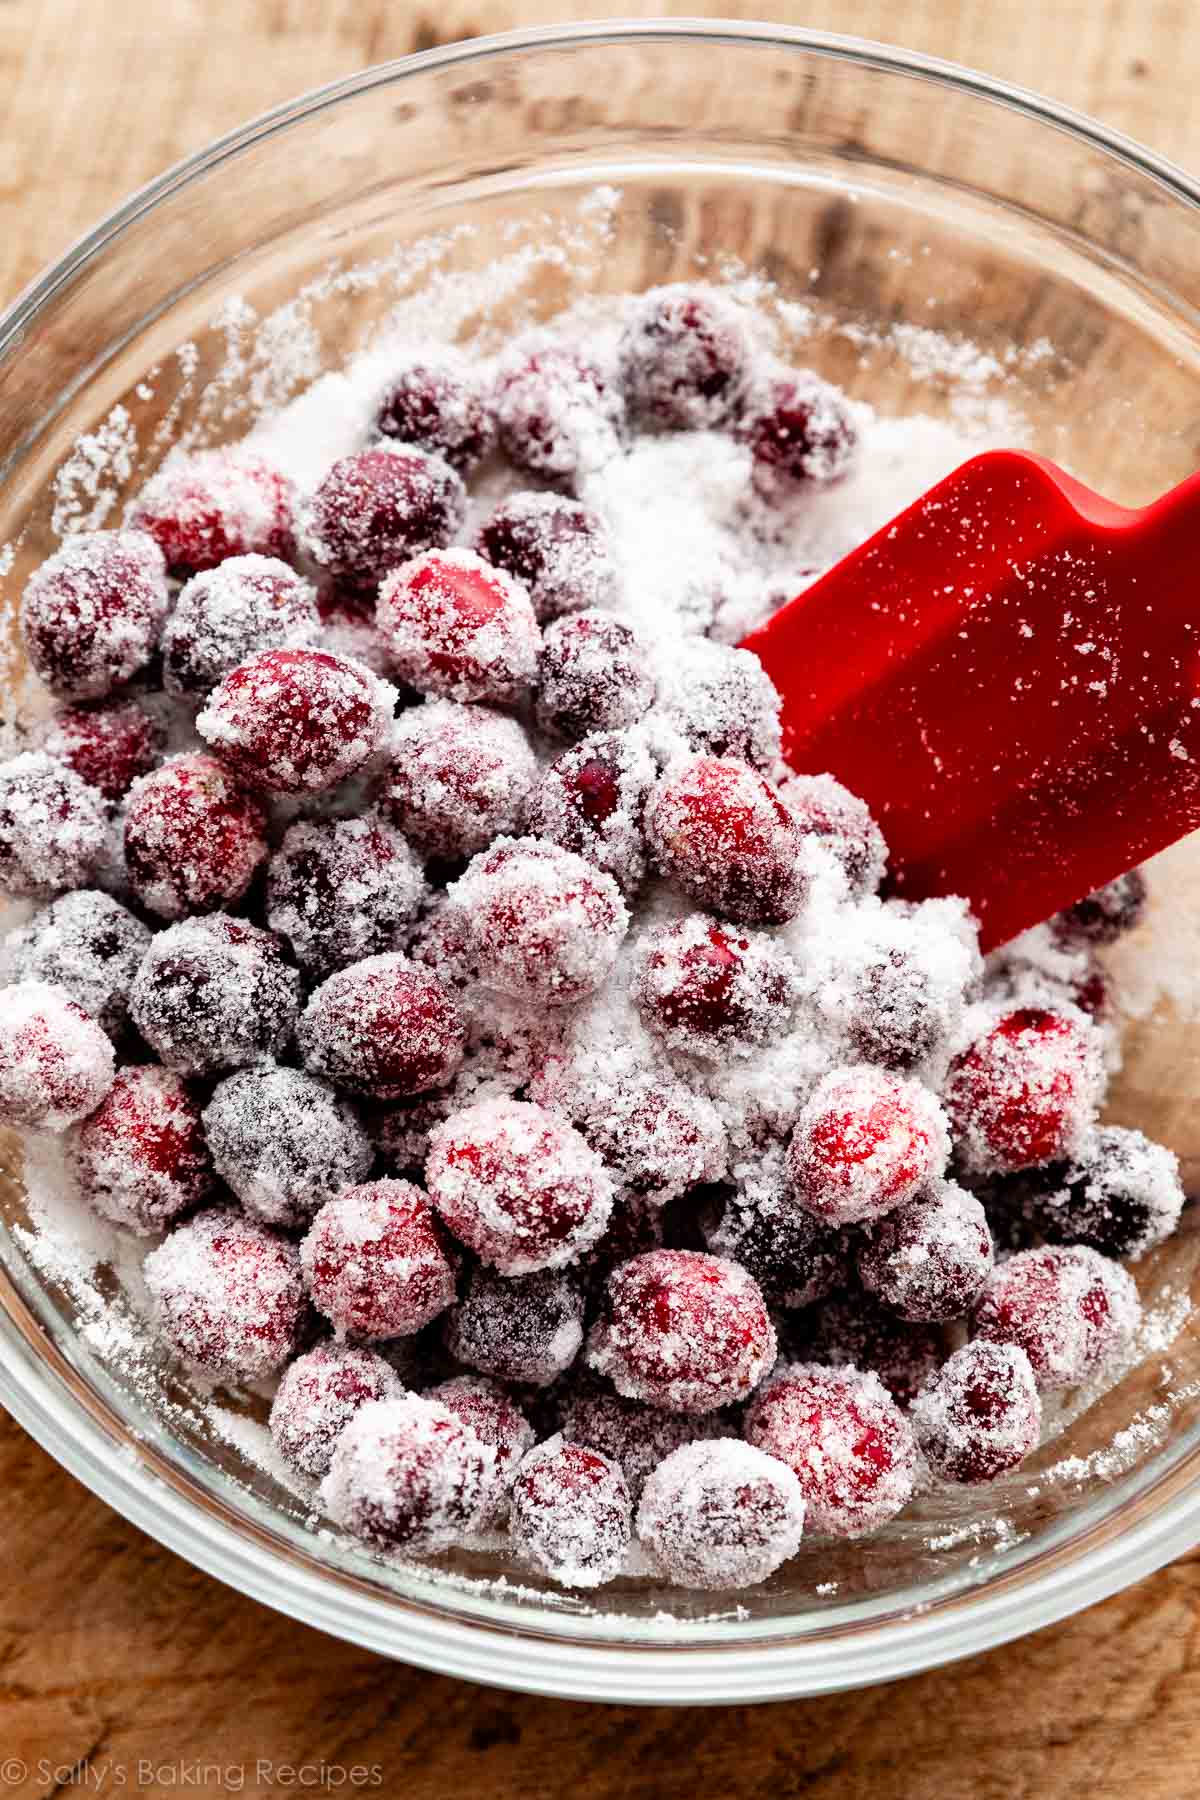 sugar and berries in glass bowl.